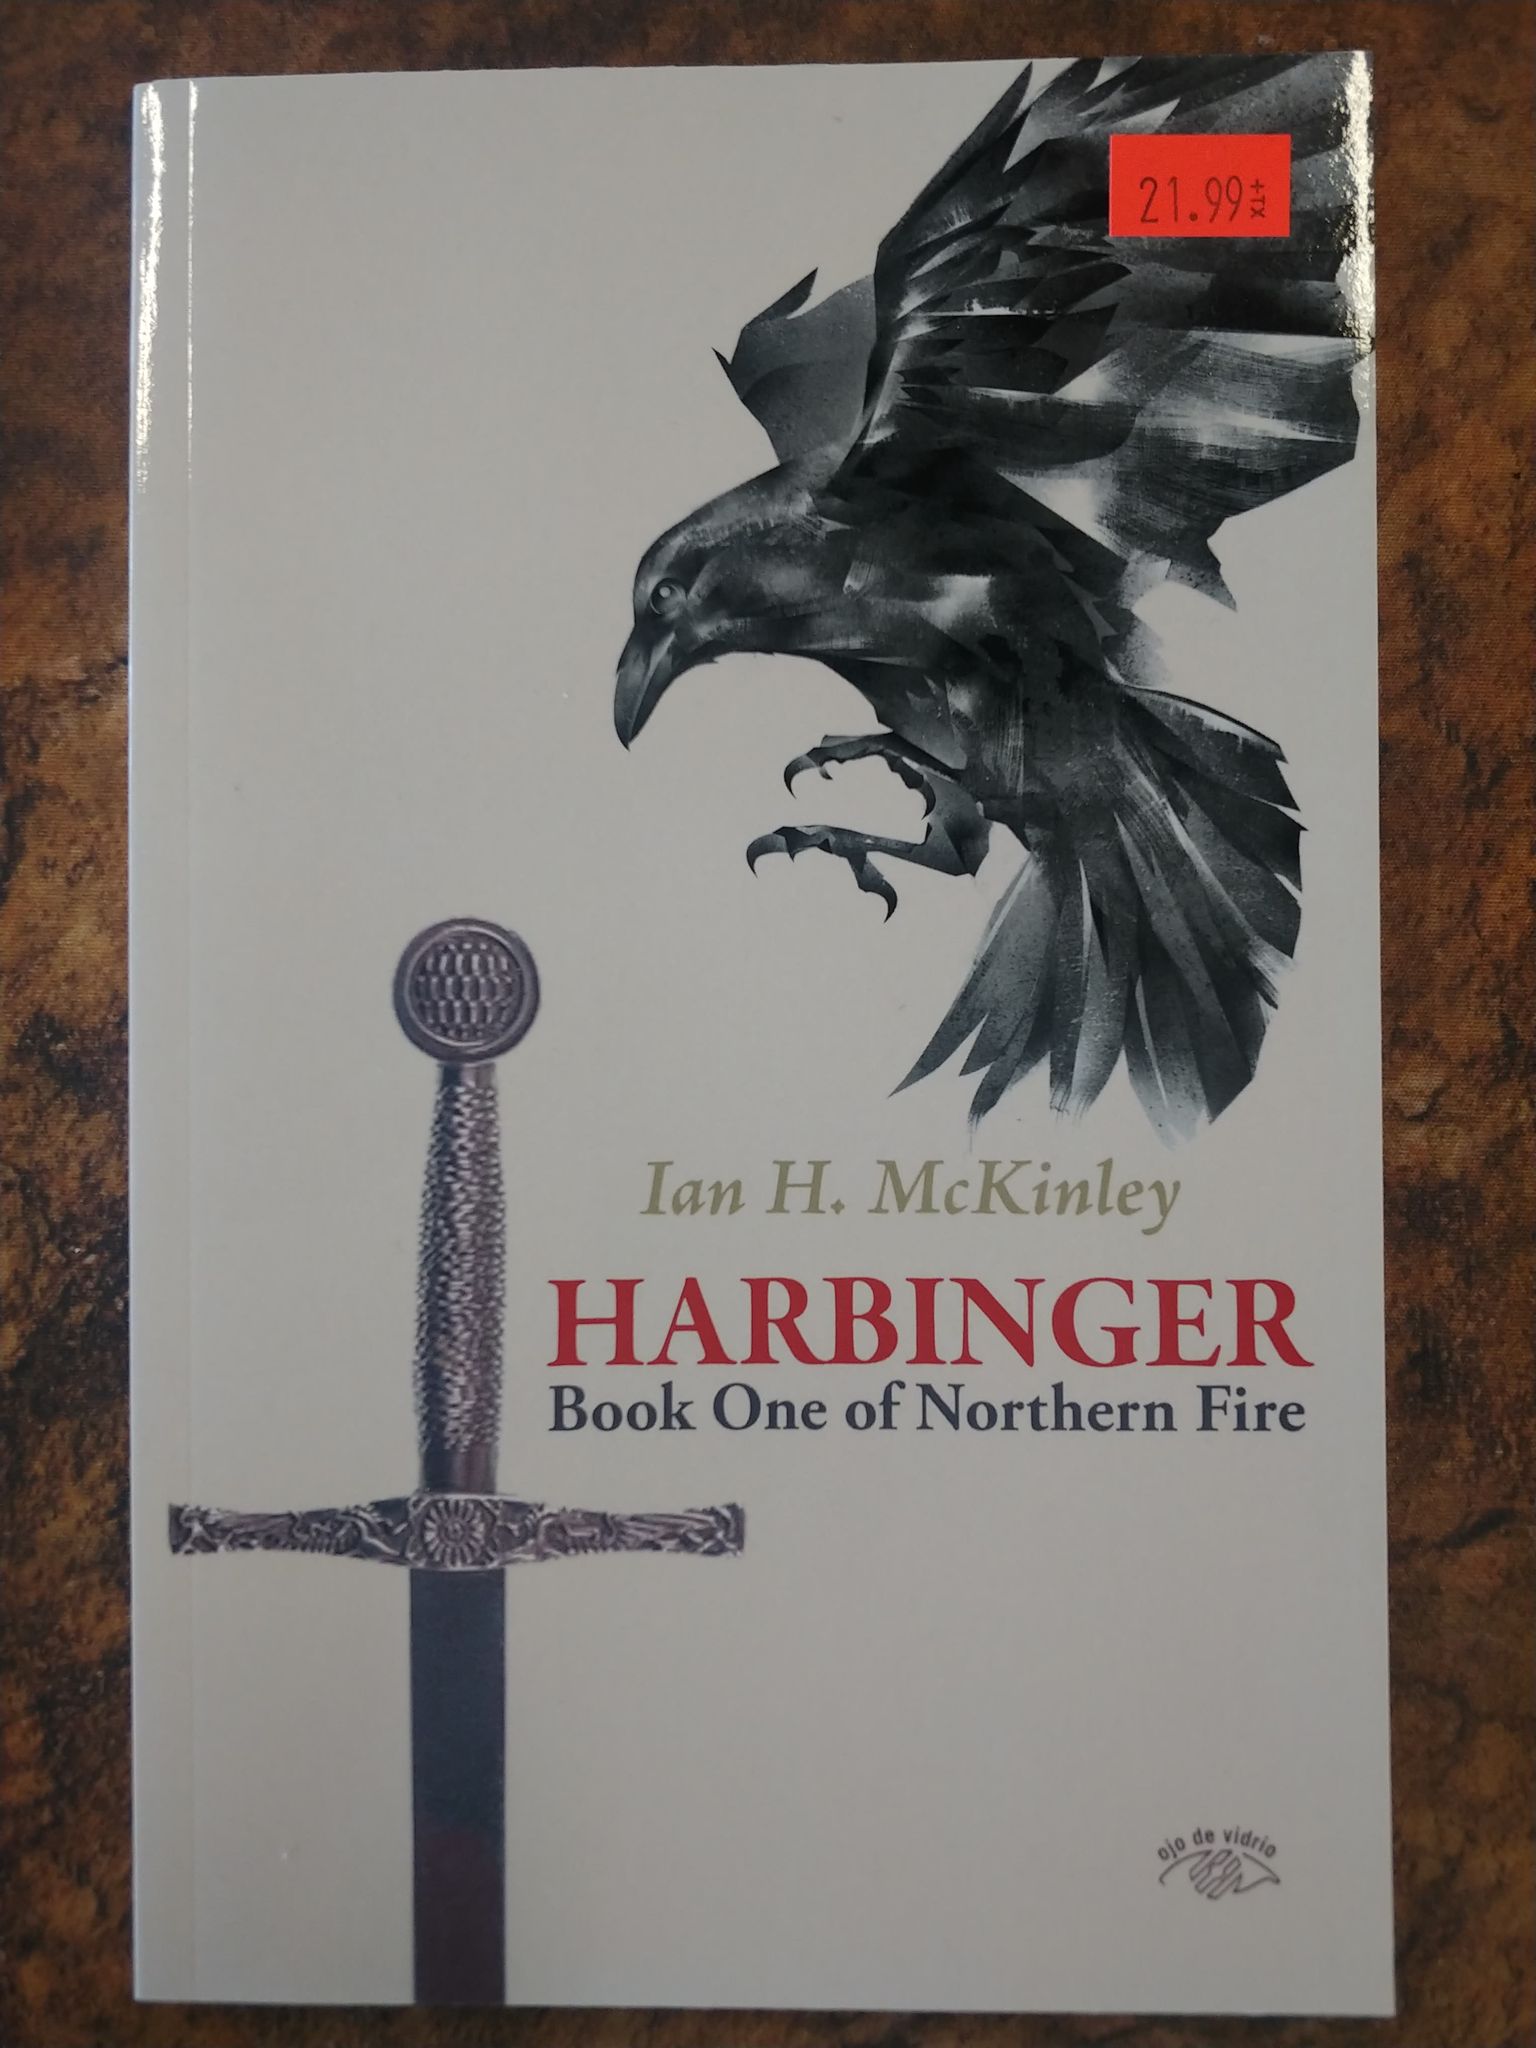 Ian H McKinley - Harbinger : Book One of Northern Fire. | Boutique FDB